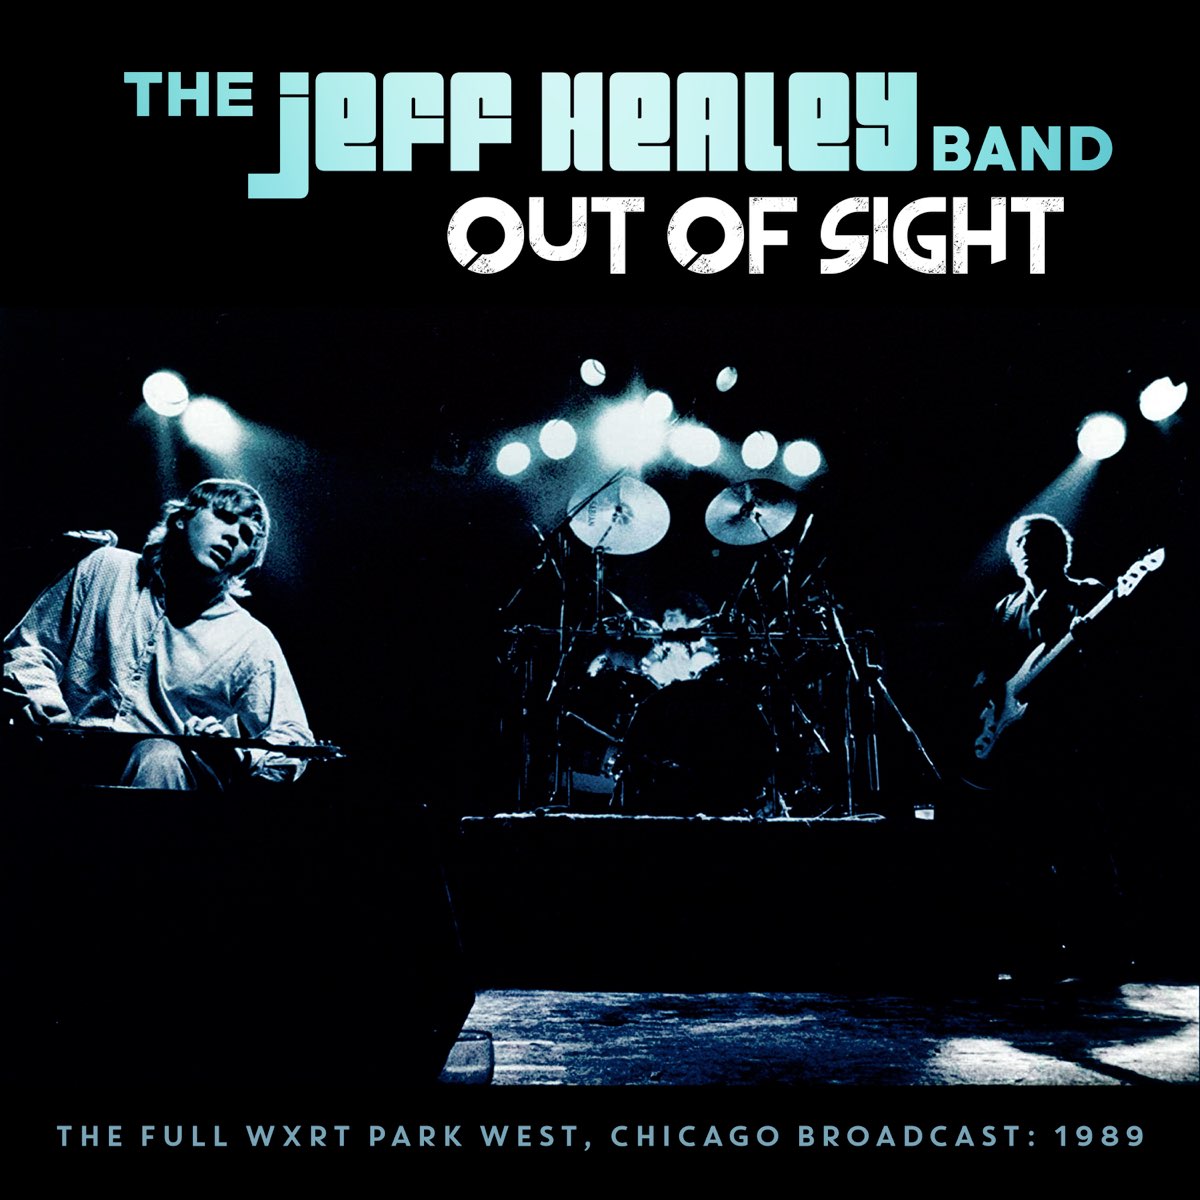 Out of Sight (Live 1989) by The Jeff Healey Band on Apple Music